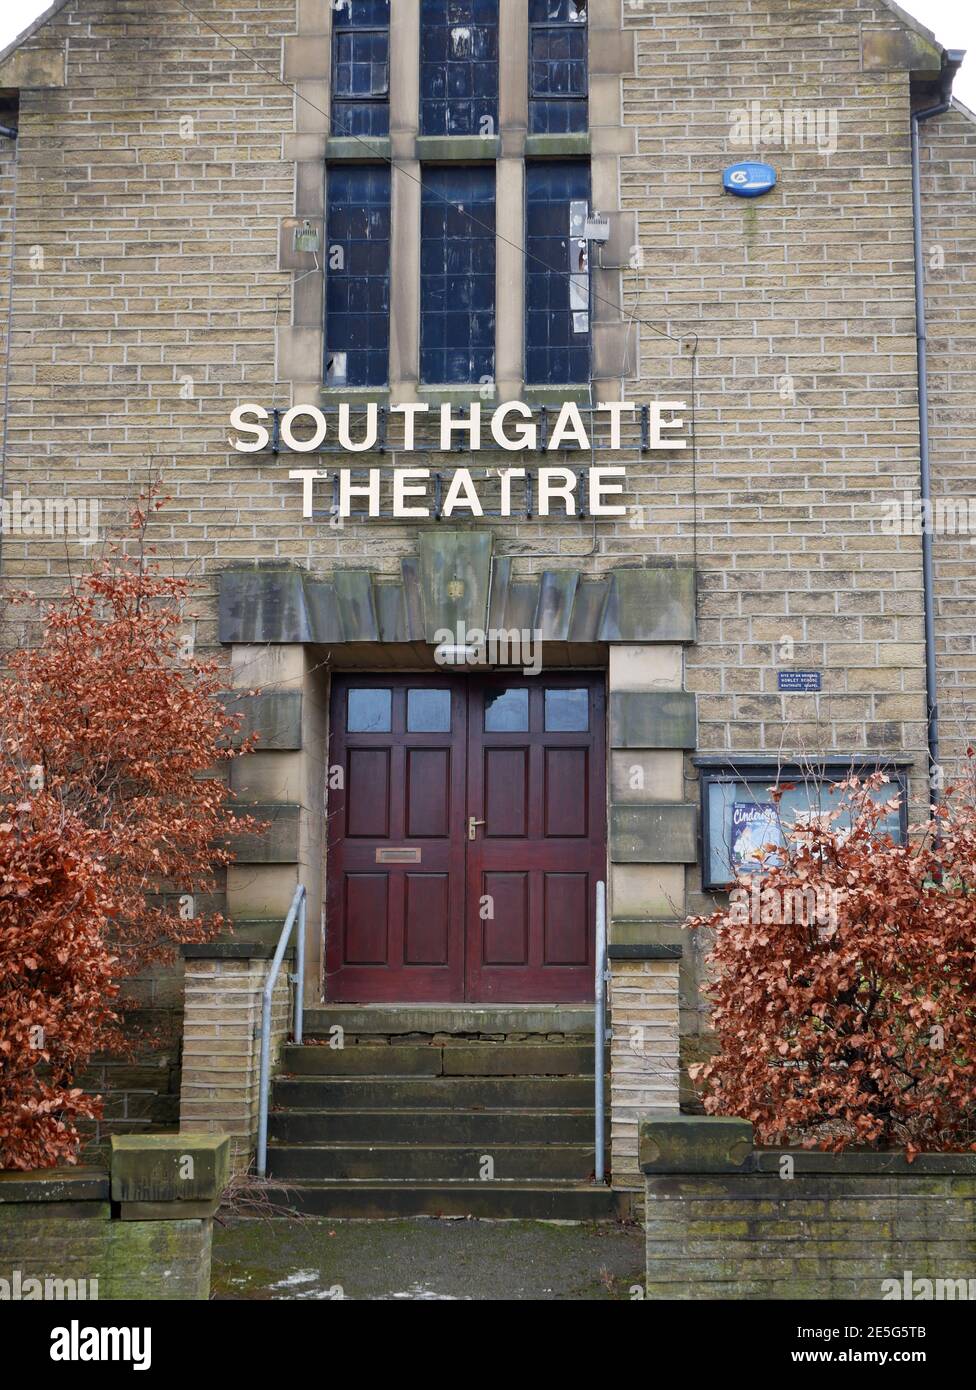 Southgate theatre stone built two story building with Southgate theatre sign in cream letters on frontage double brown doors stone steps Stock Photo